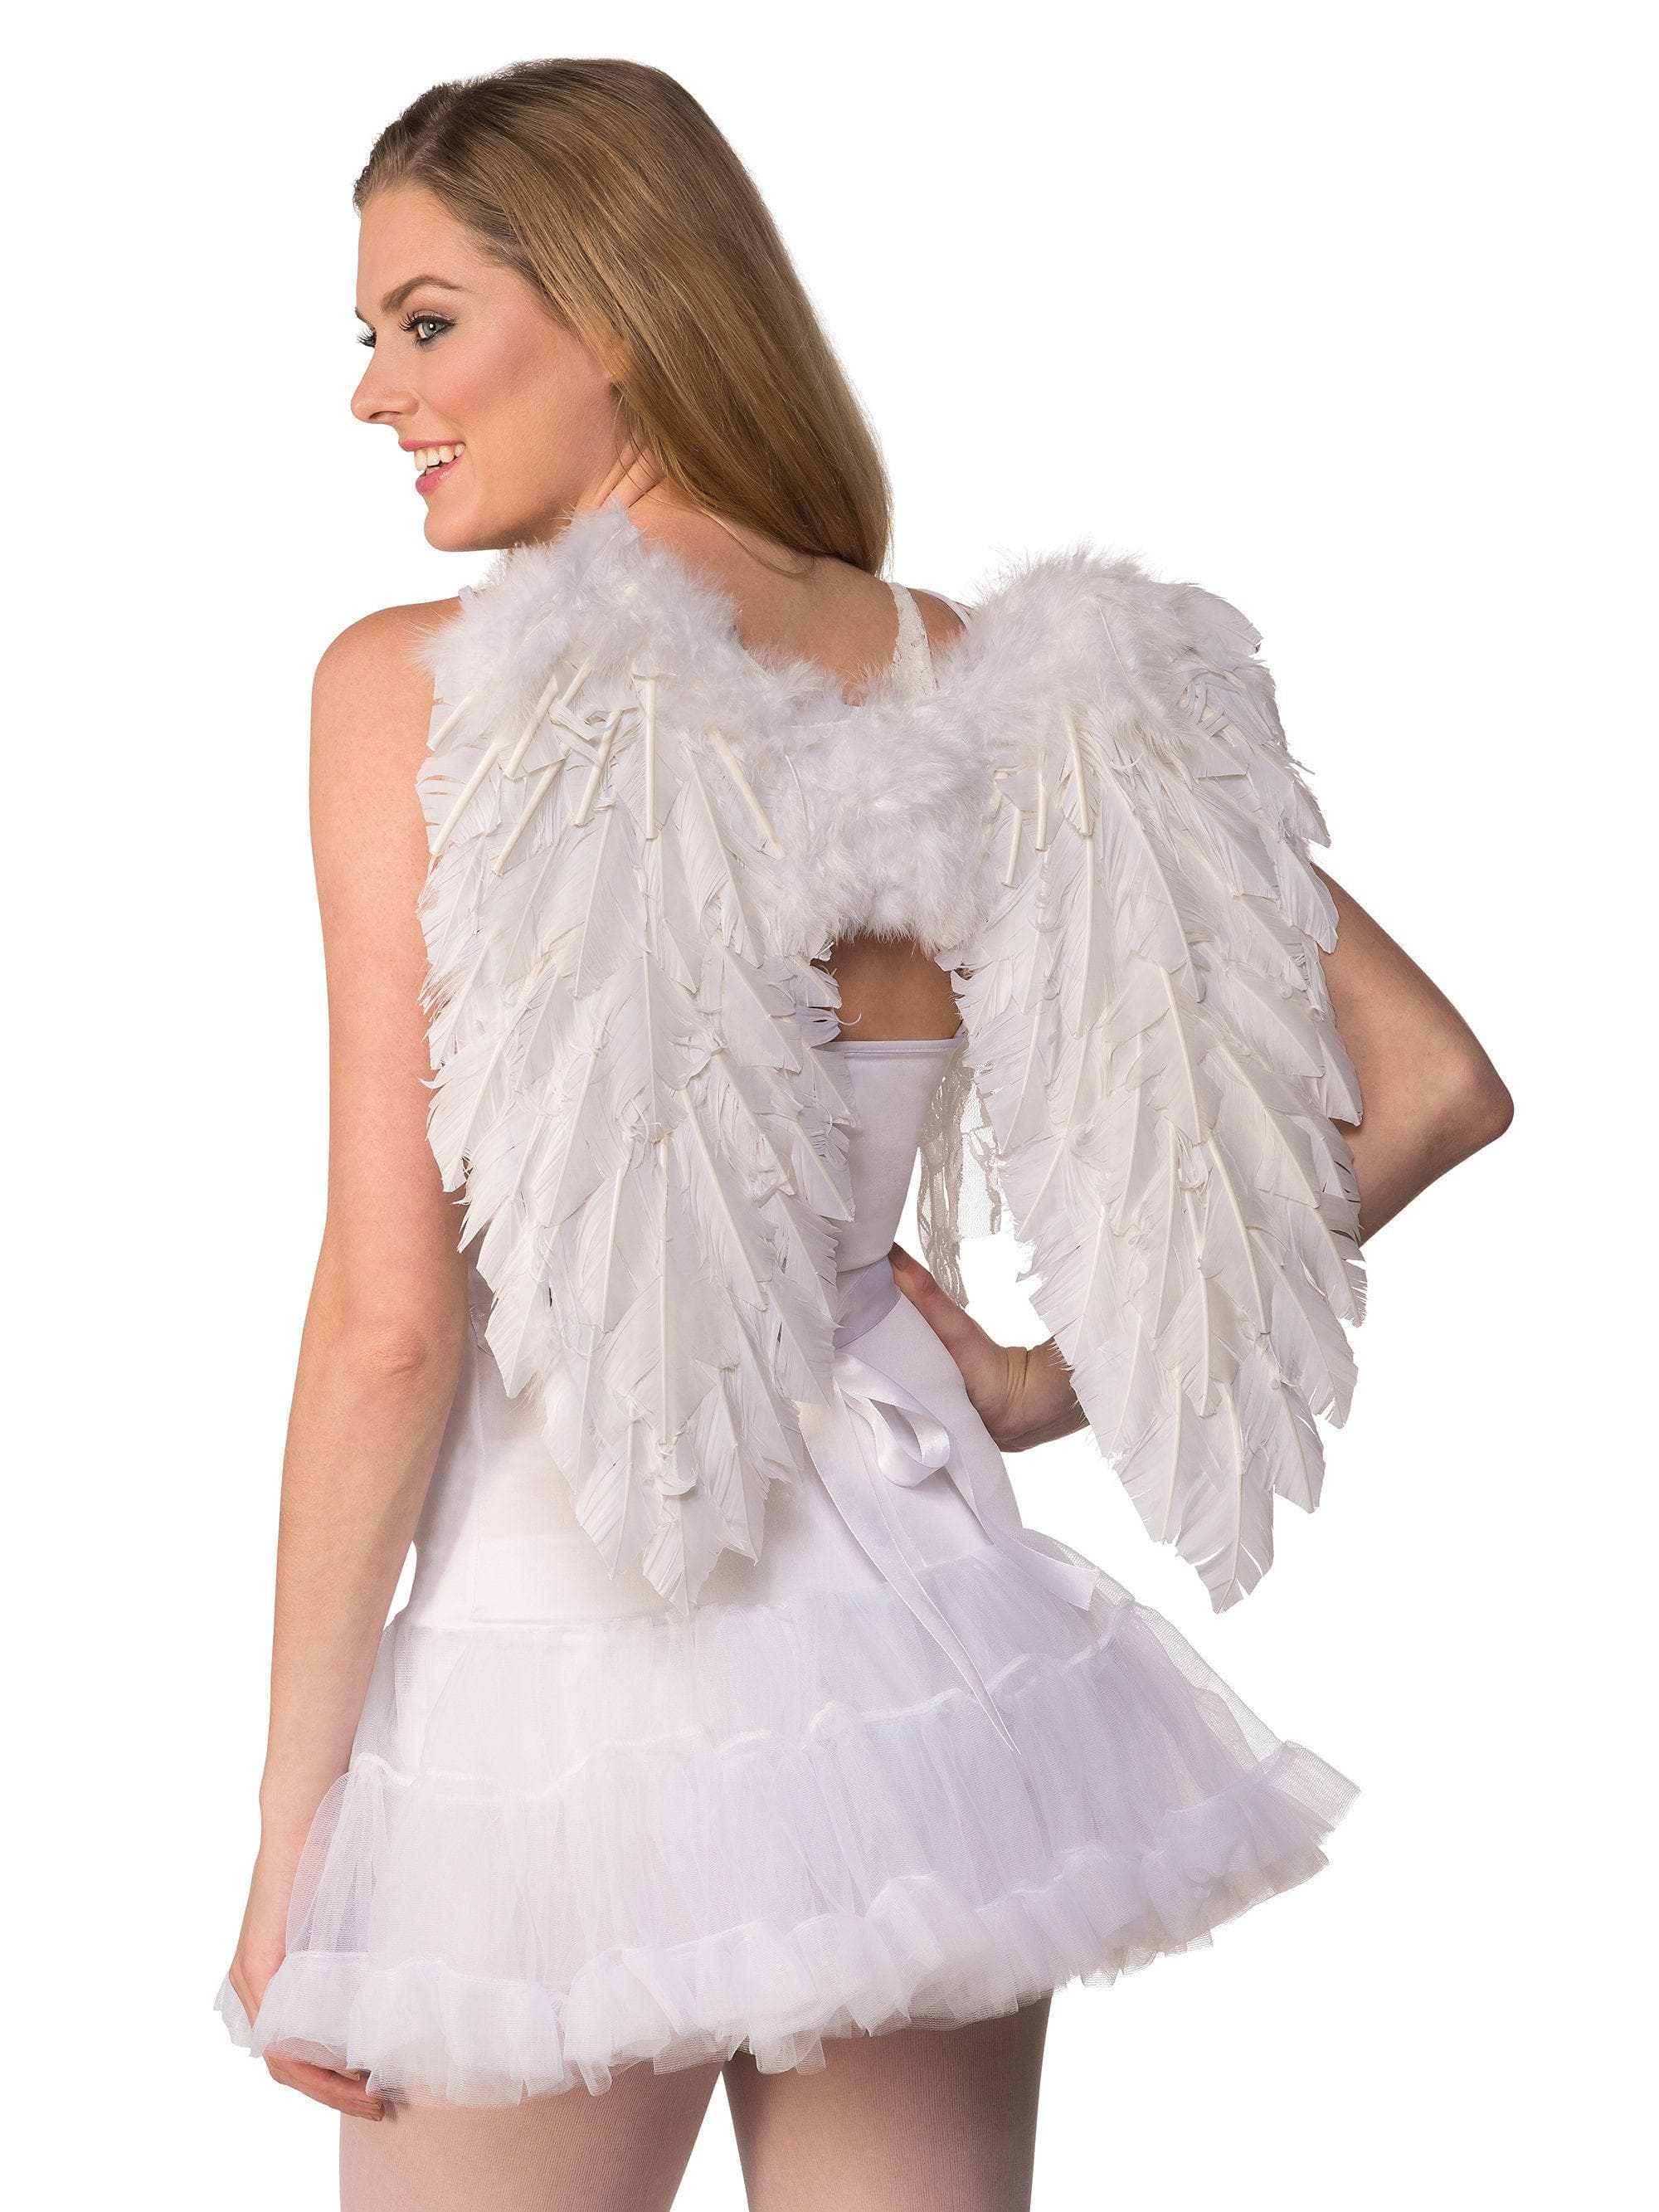 Feather Angel Wings - costumes.com